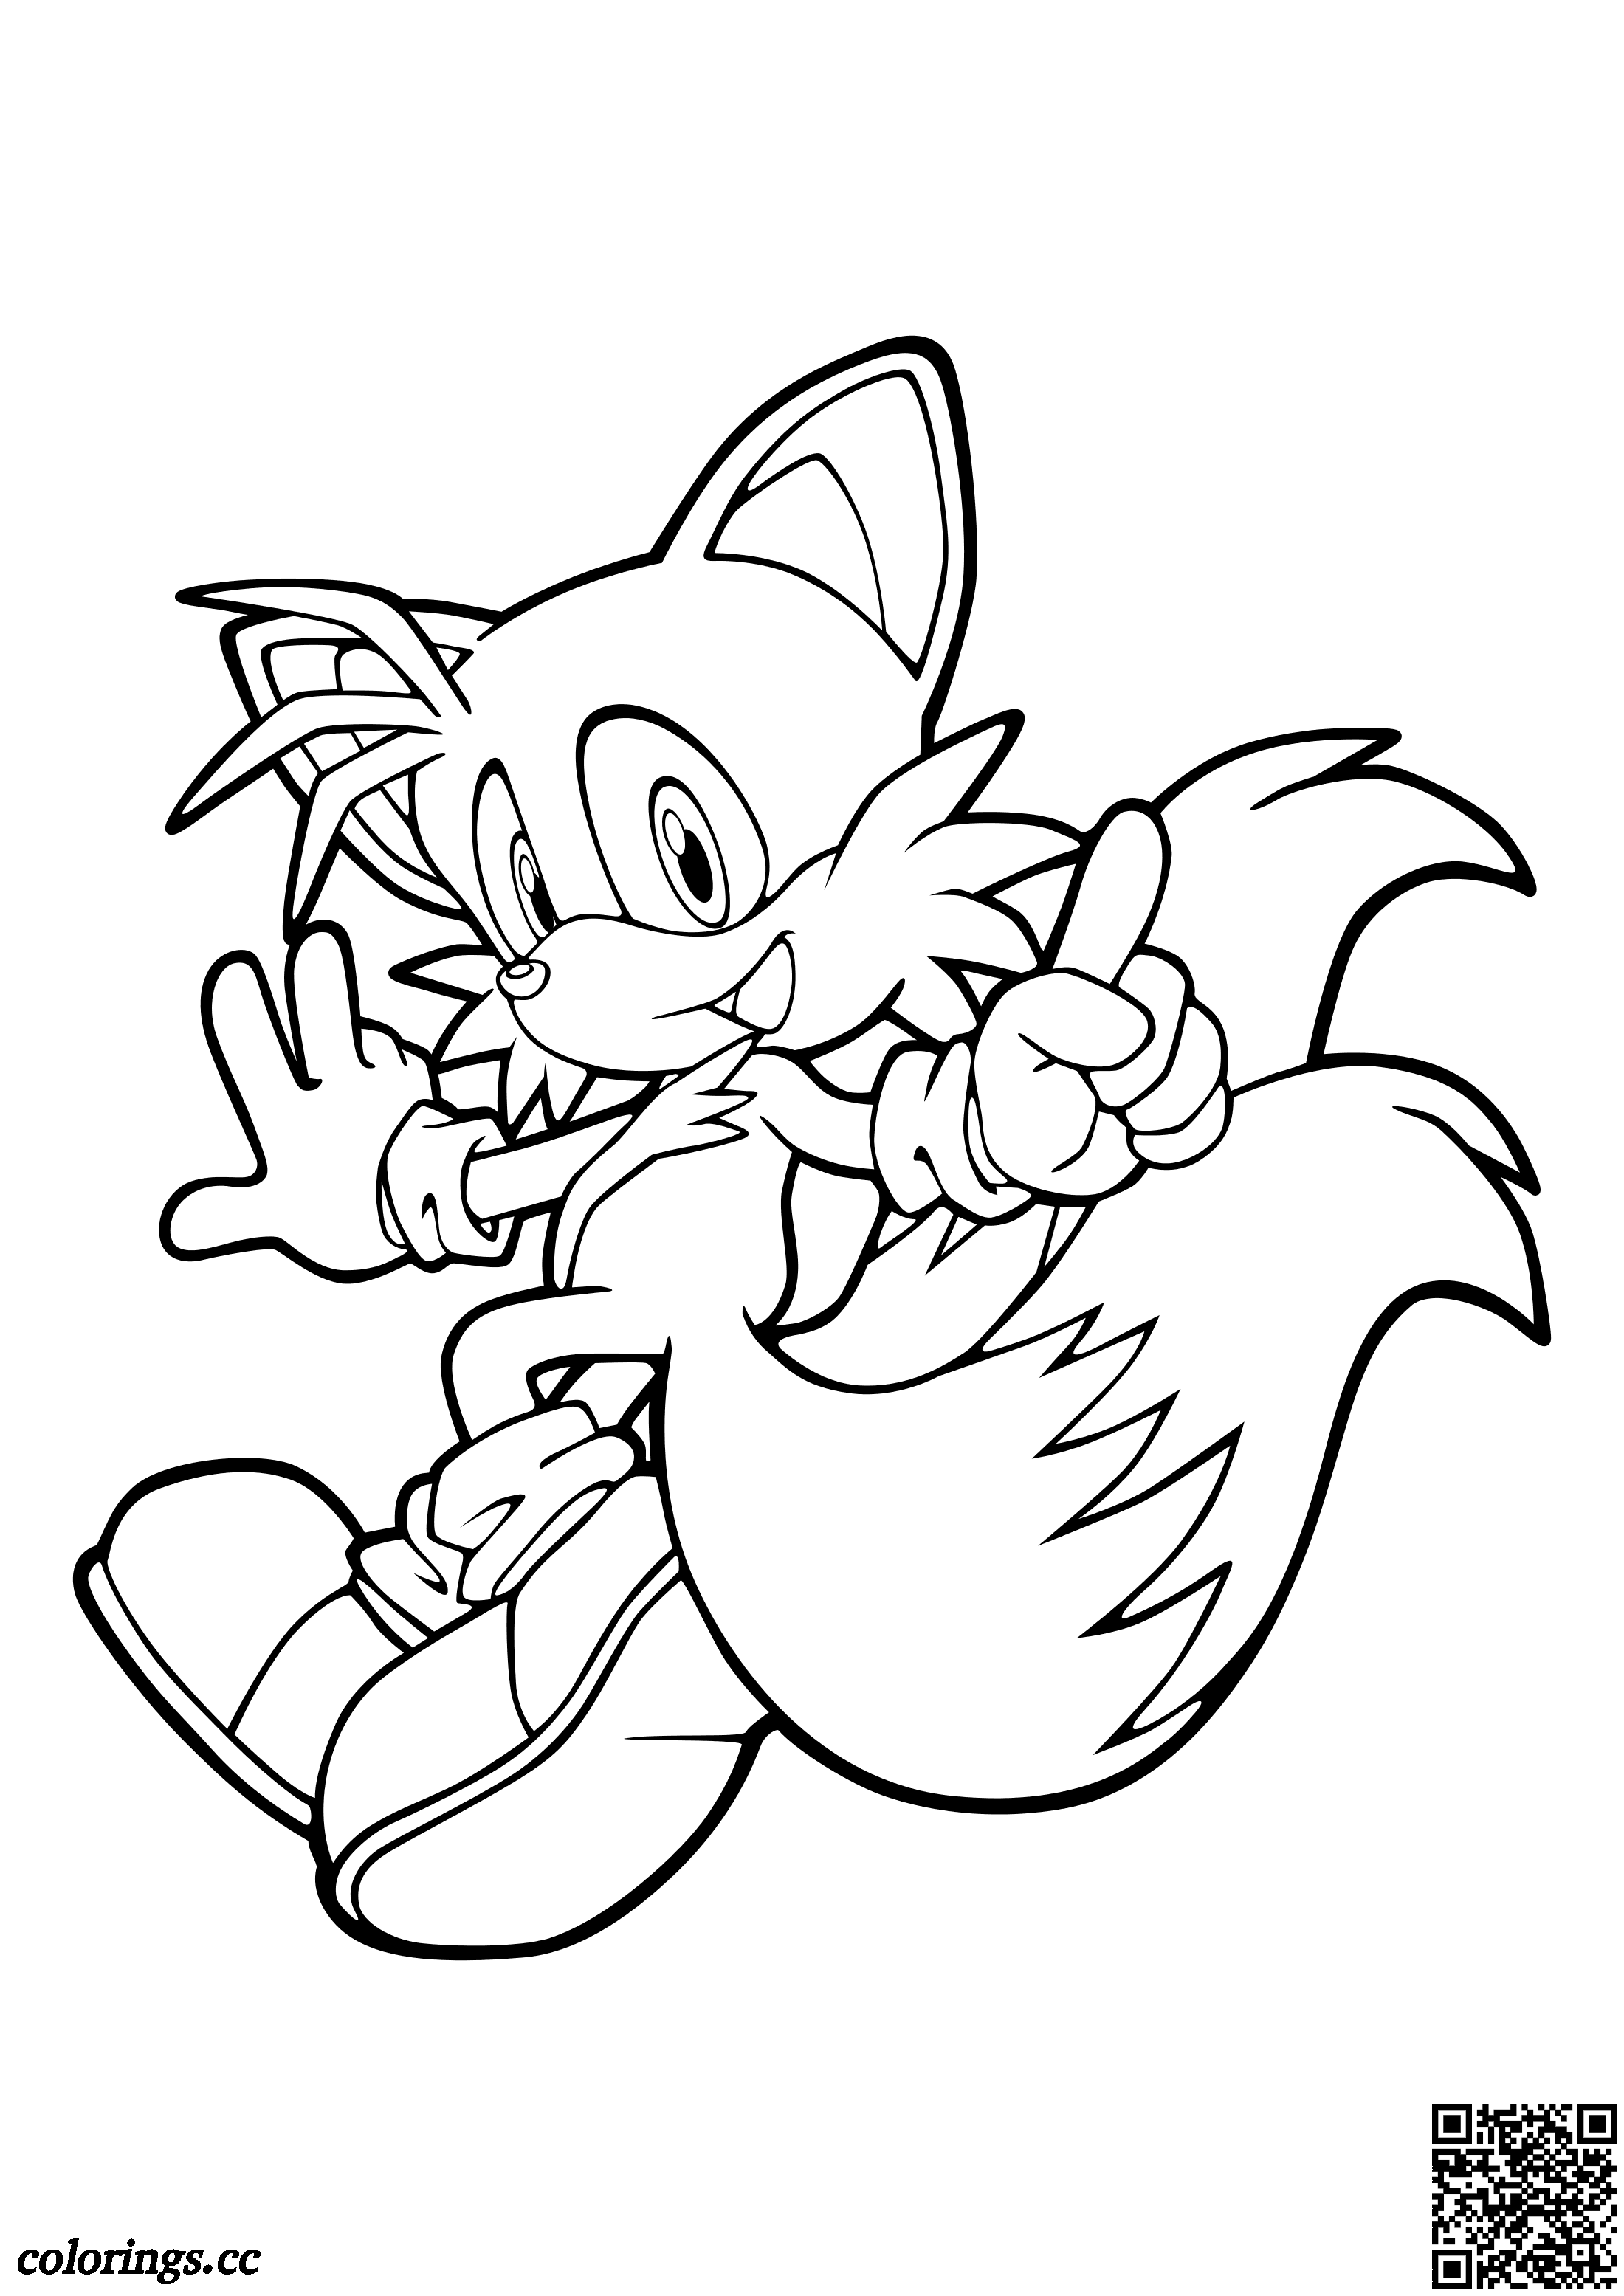 Tails is running coloring pages, Sonic the Hedgehog coloring pages -  Colorings.cc